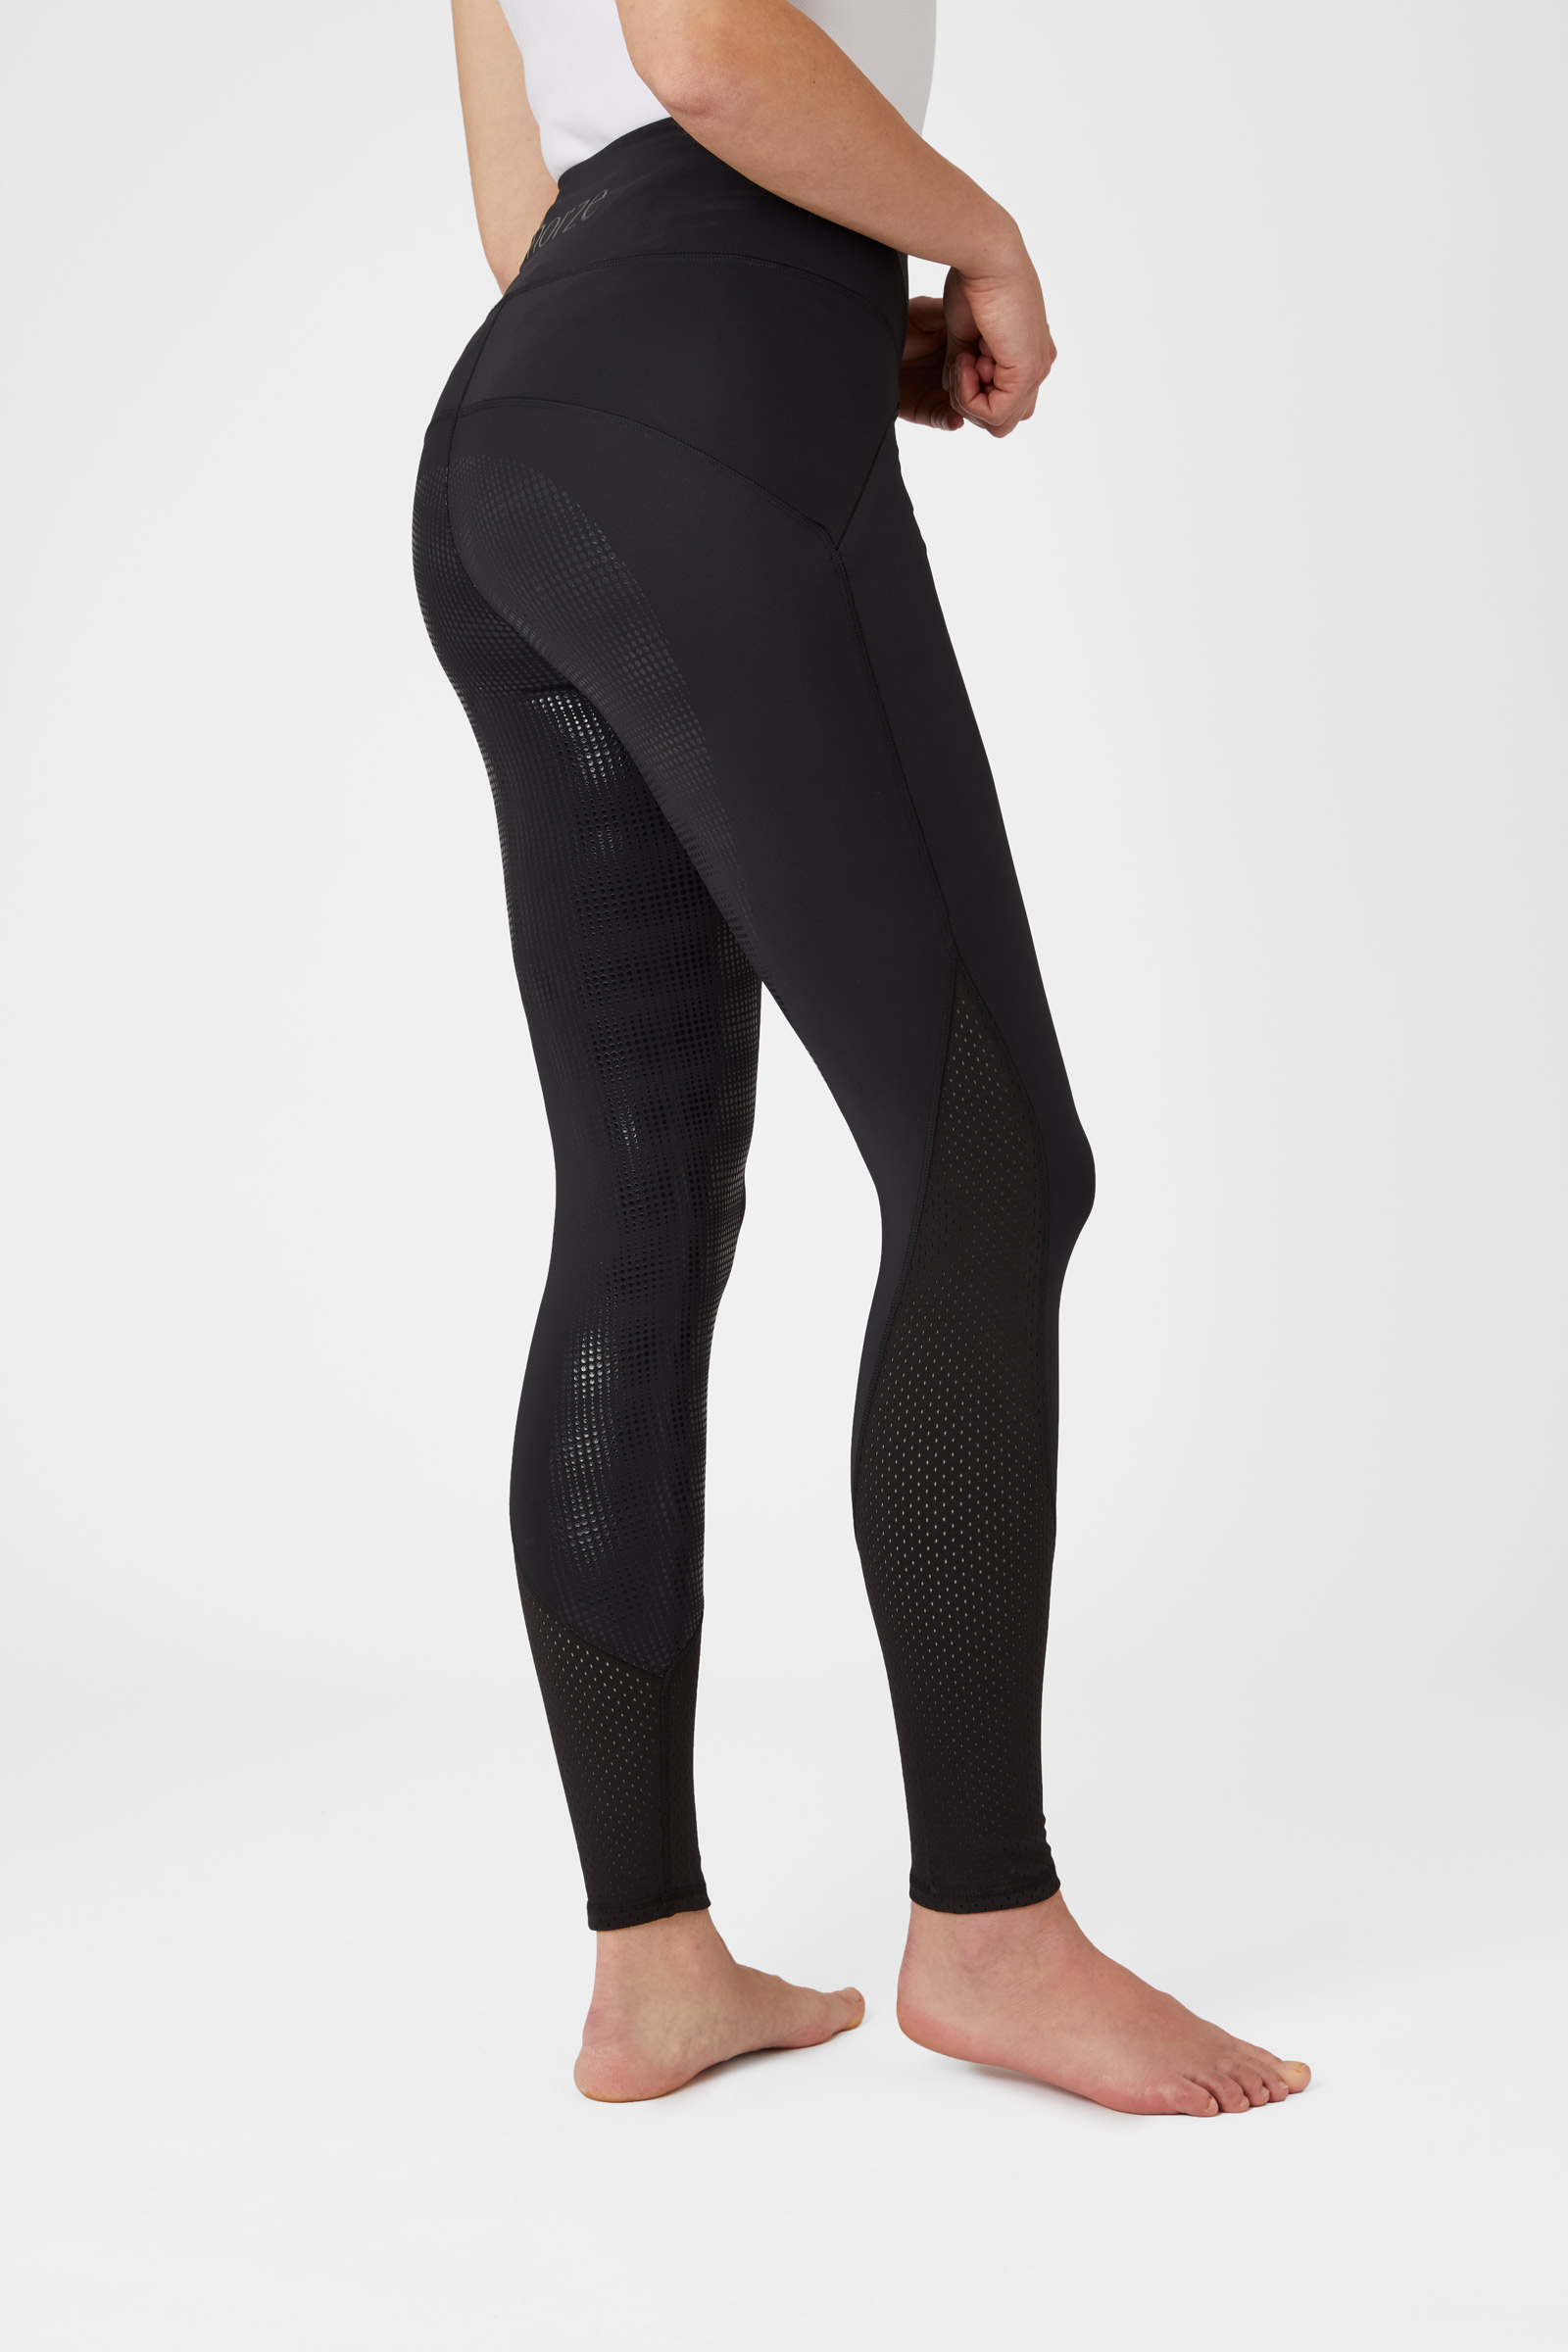 Buy Horze Women's High Waist Silicone Full Seat Riding Tights with